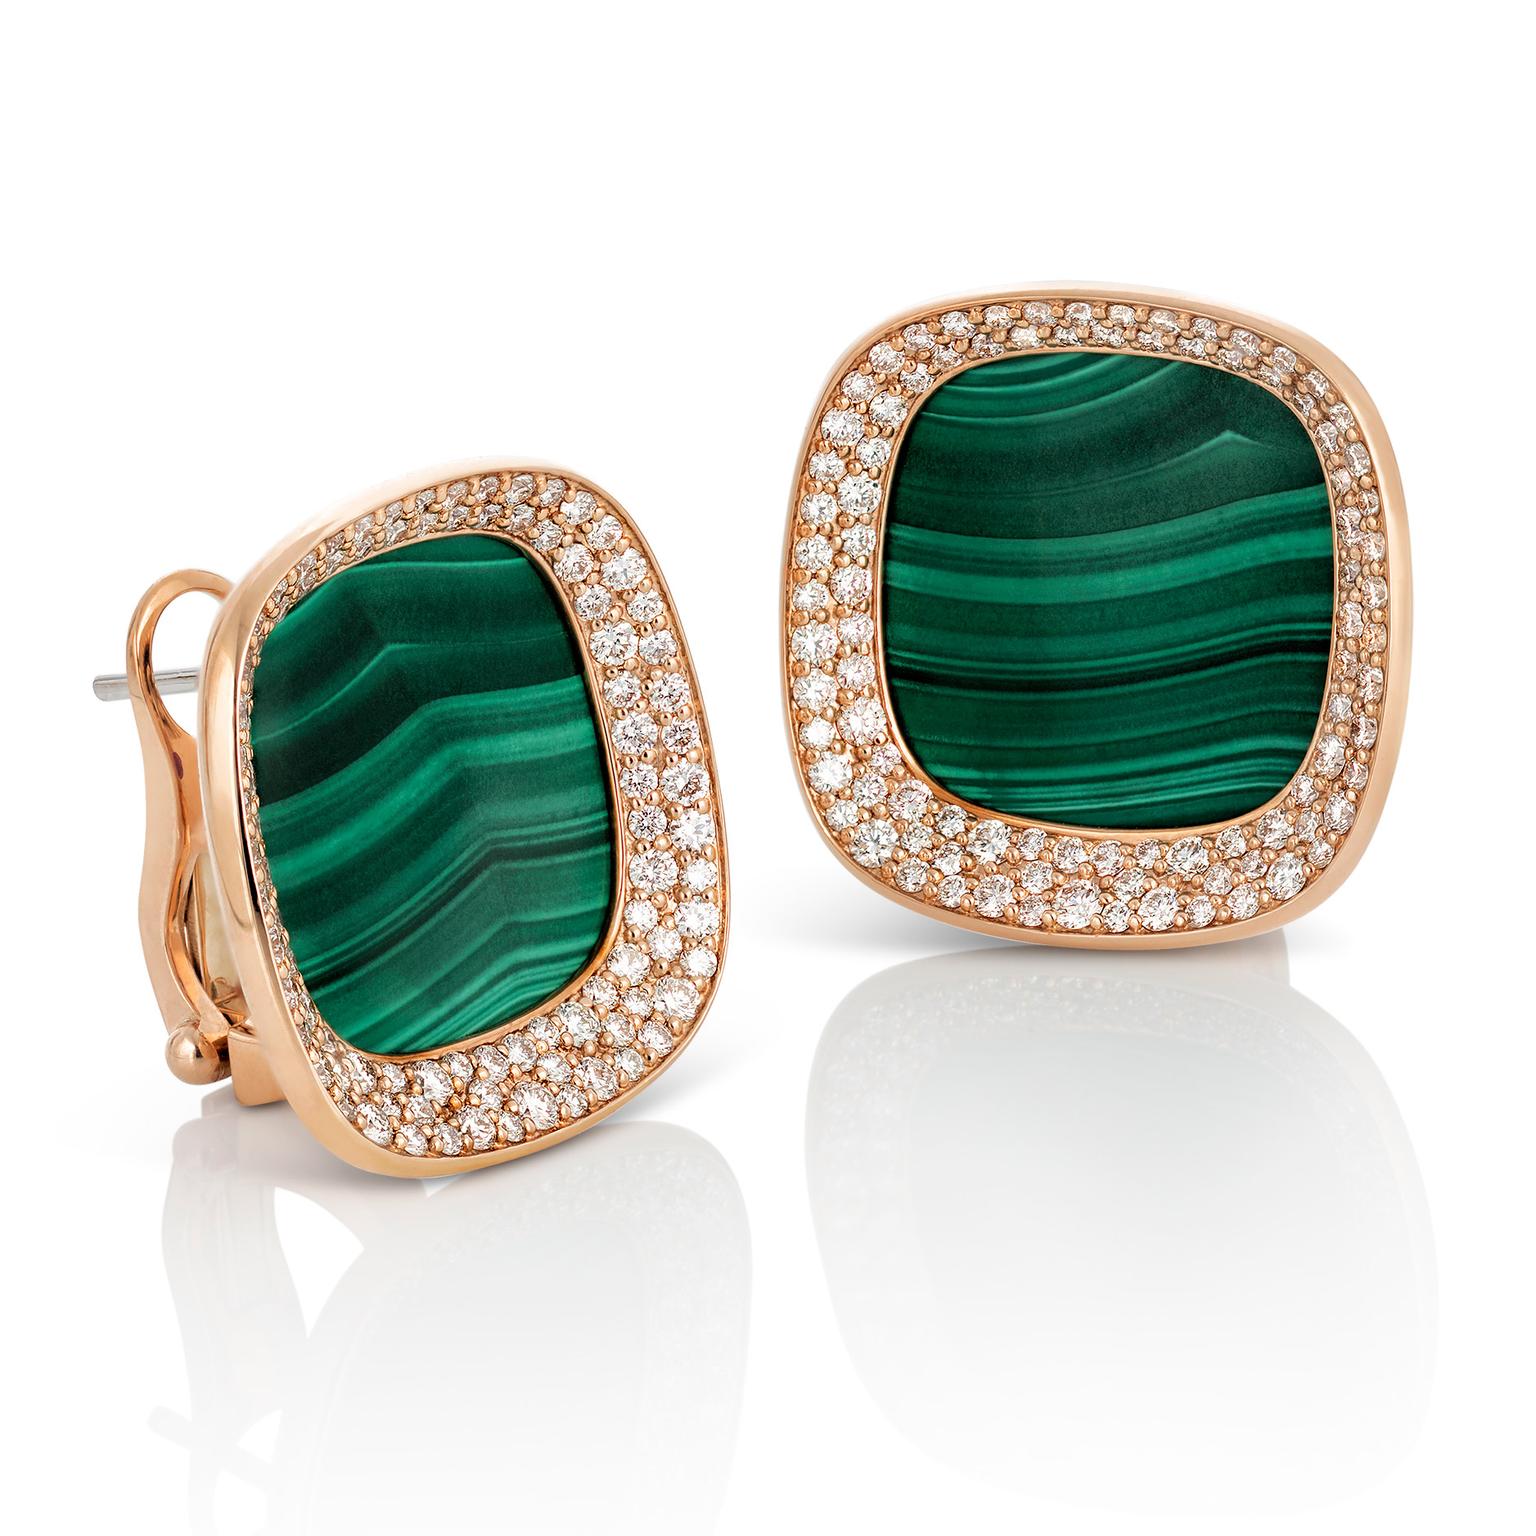 Malachite jewelry re-enter the Seventies in style